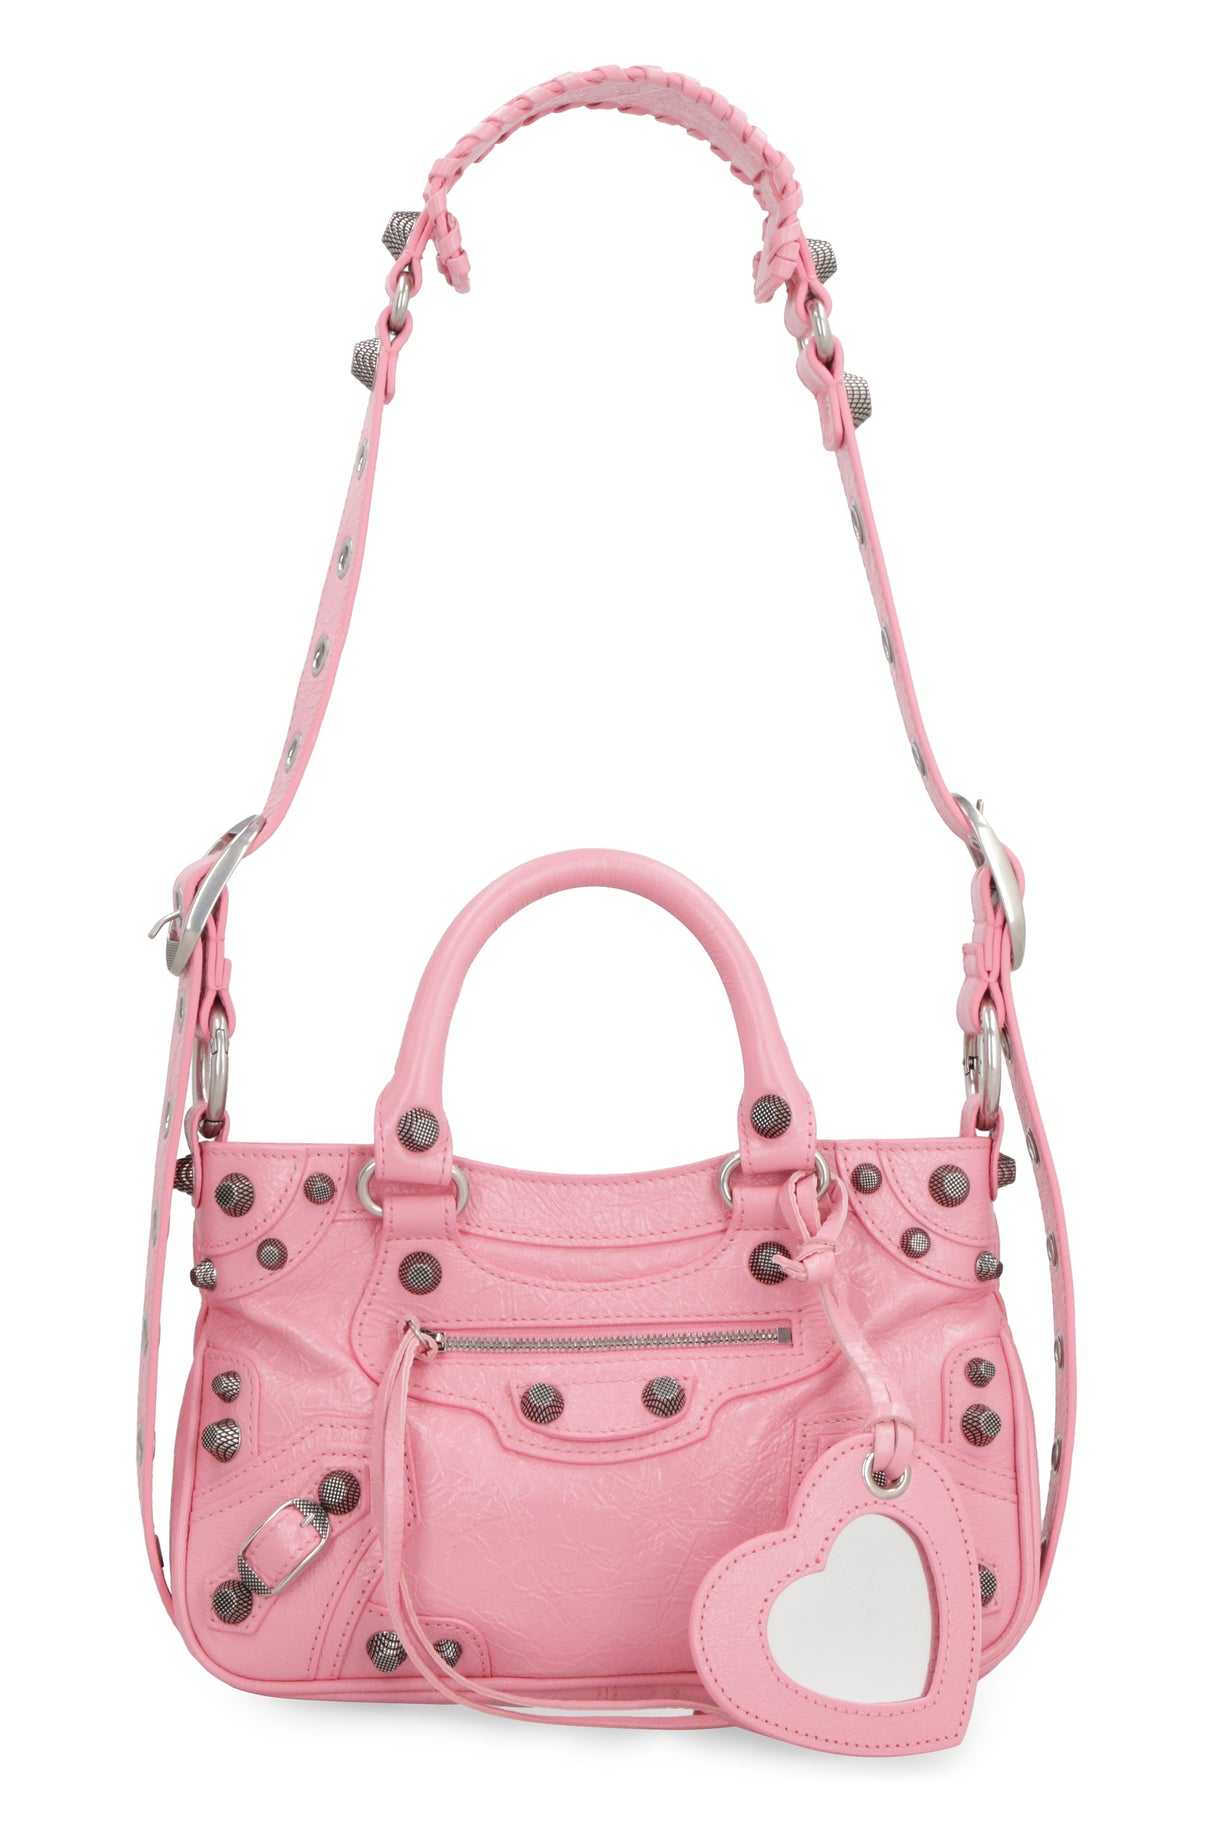 Studded Pink Leather Tote Bag for Women